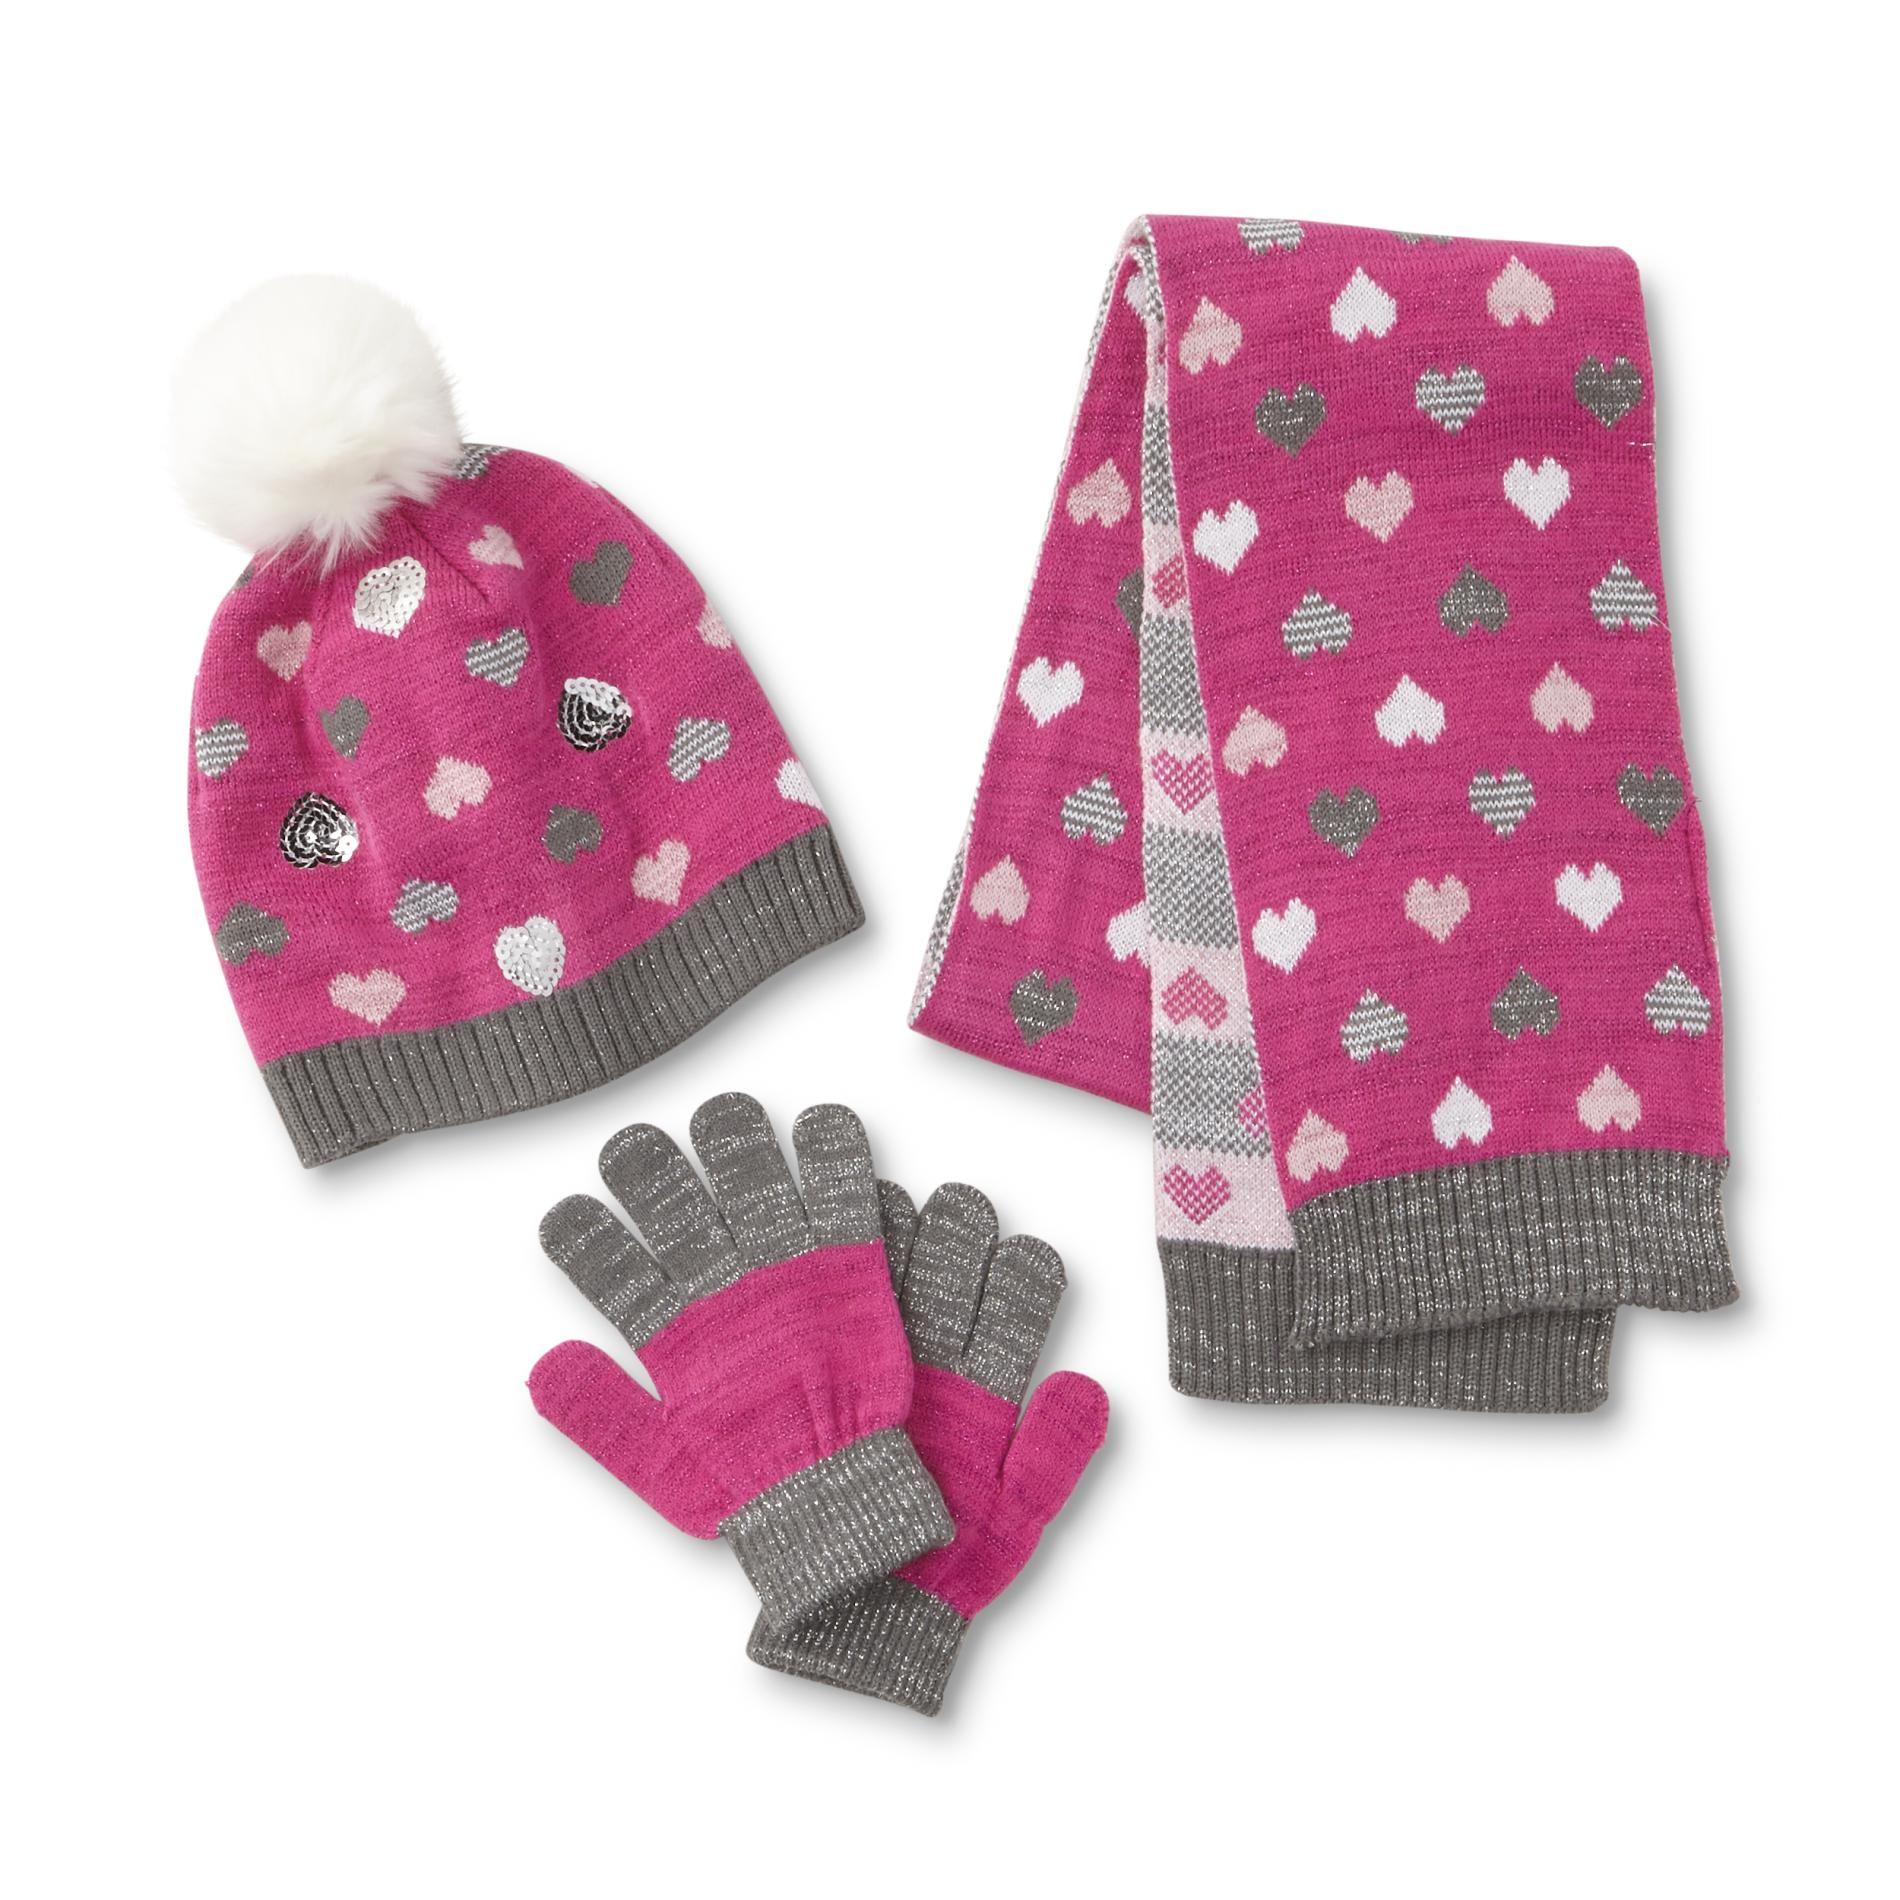 Toby & Me Girls' Hat, Scarf & Gloves - Hearts